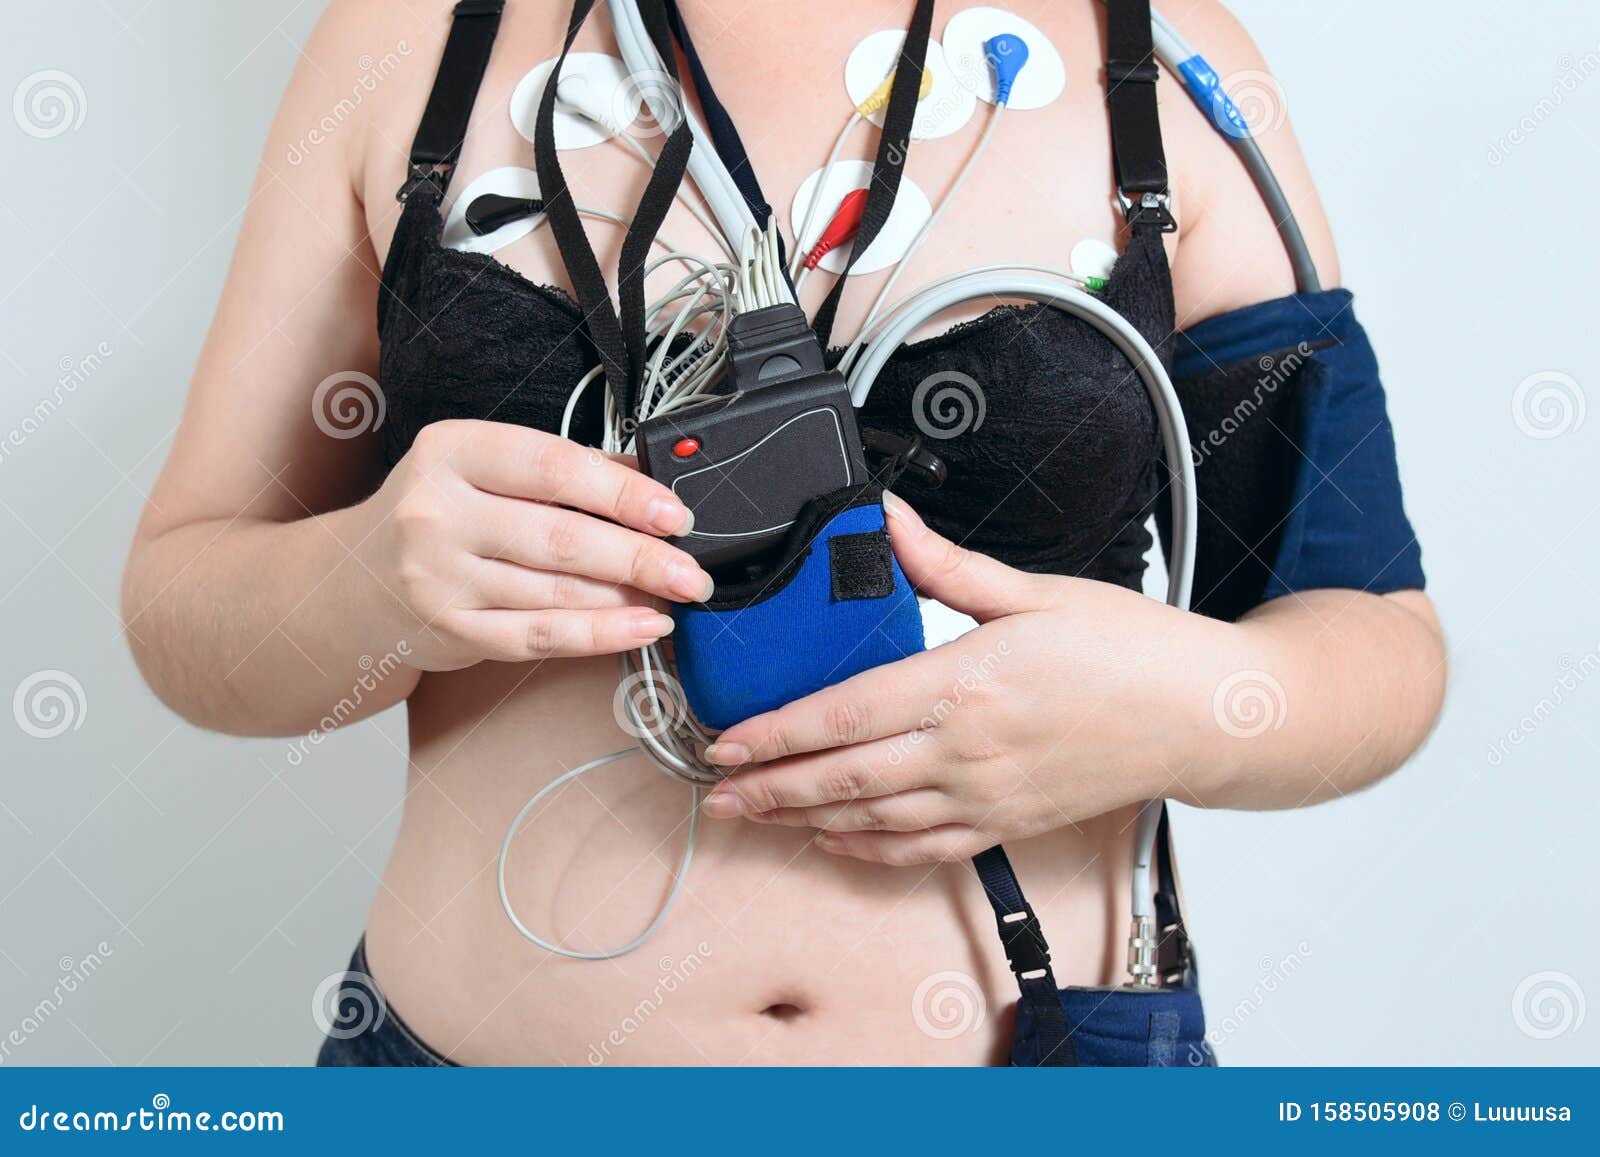 https://thumbs.dreamstime.com/z/electrodes-holter-monitoring-blood-pressure-monitor-system-chest-woman-electrodes-holter-monitoring-blood-158505908.jpg